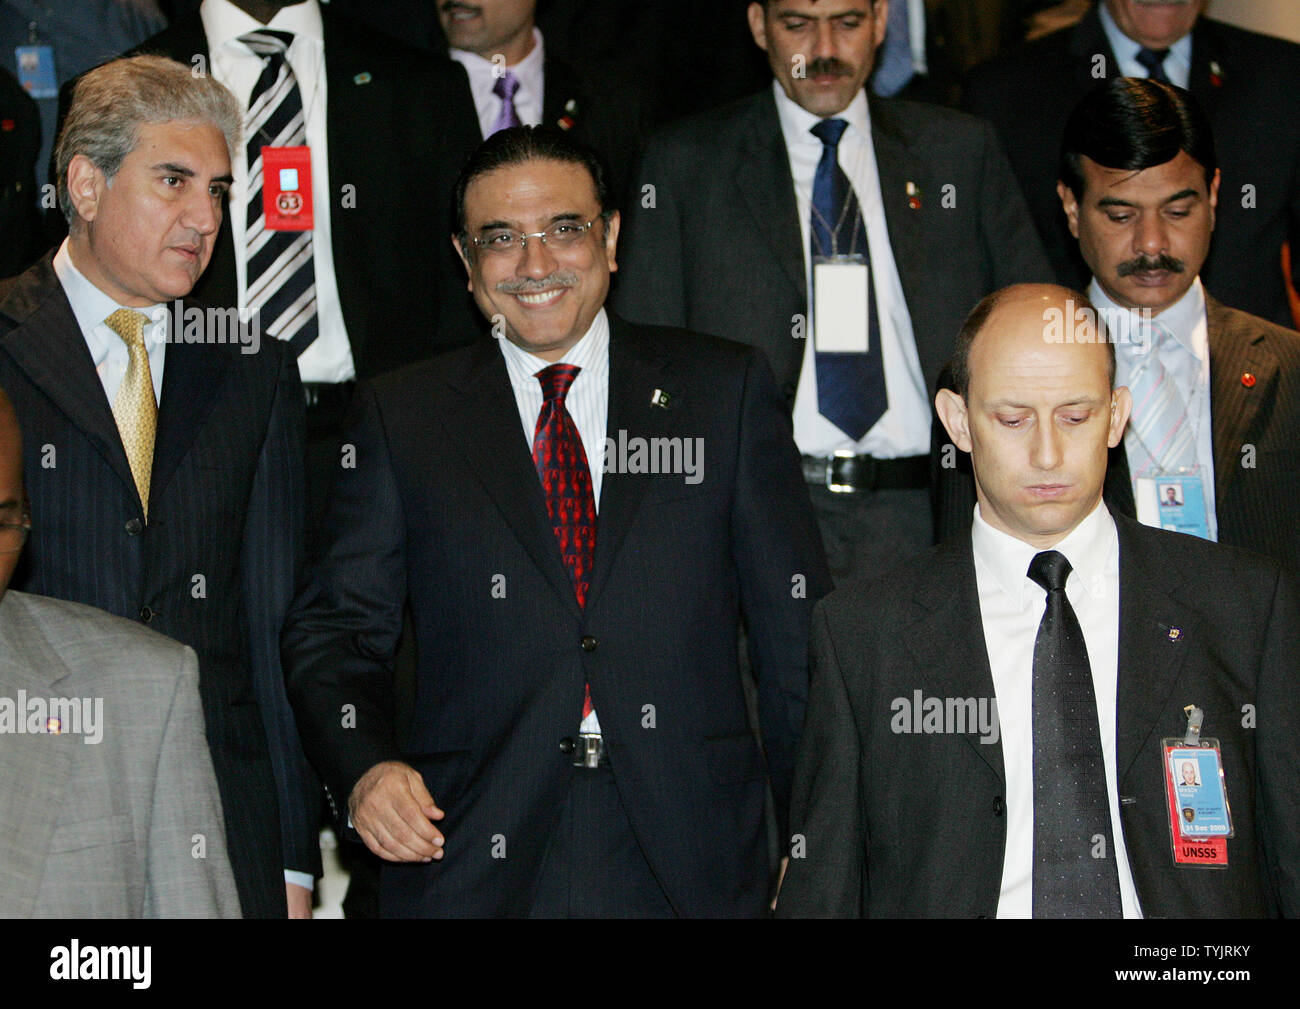 Asif Ali Zardari, second left, president of Pakistan, arrives to theFriends of Pakistan meeting during the 63rd session of the General Assembly at the United Nations on September 26, 2008 in New York City. (UPI Photo/Monika Graff) Stock Photo